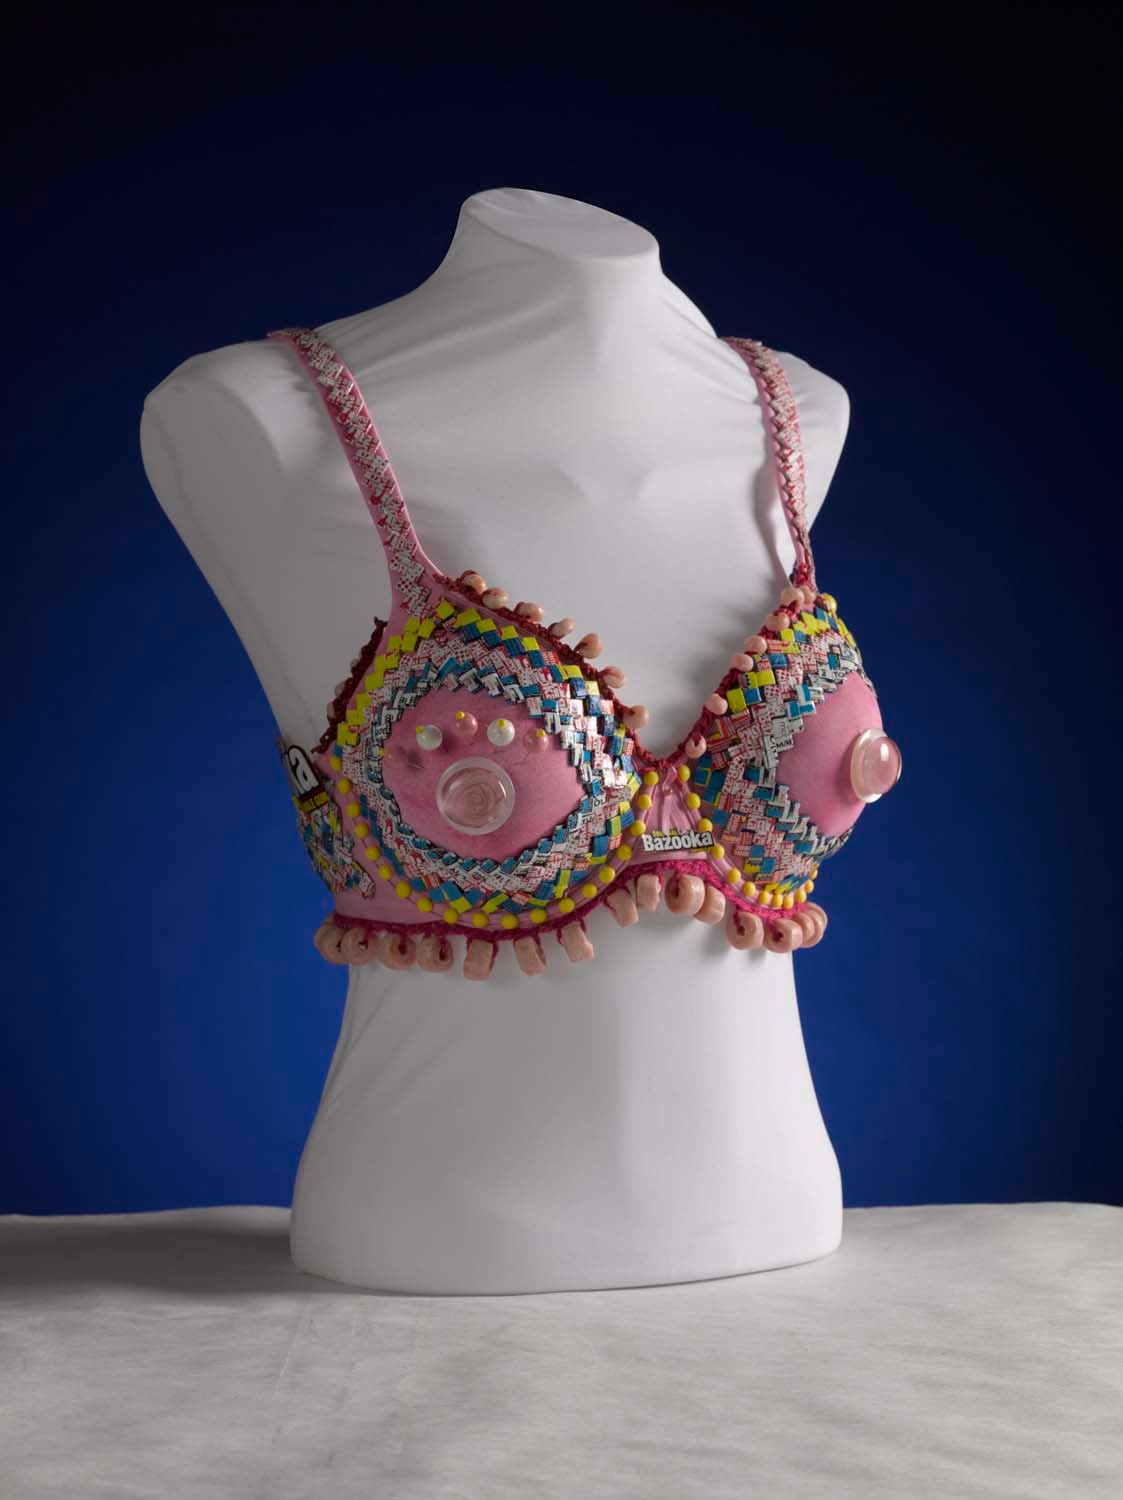 Bra fitters have their breasts turned into sculptures in art celebration of  'boobs